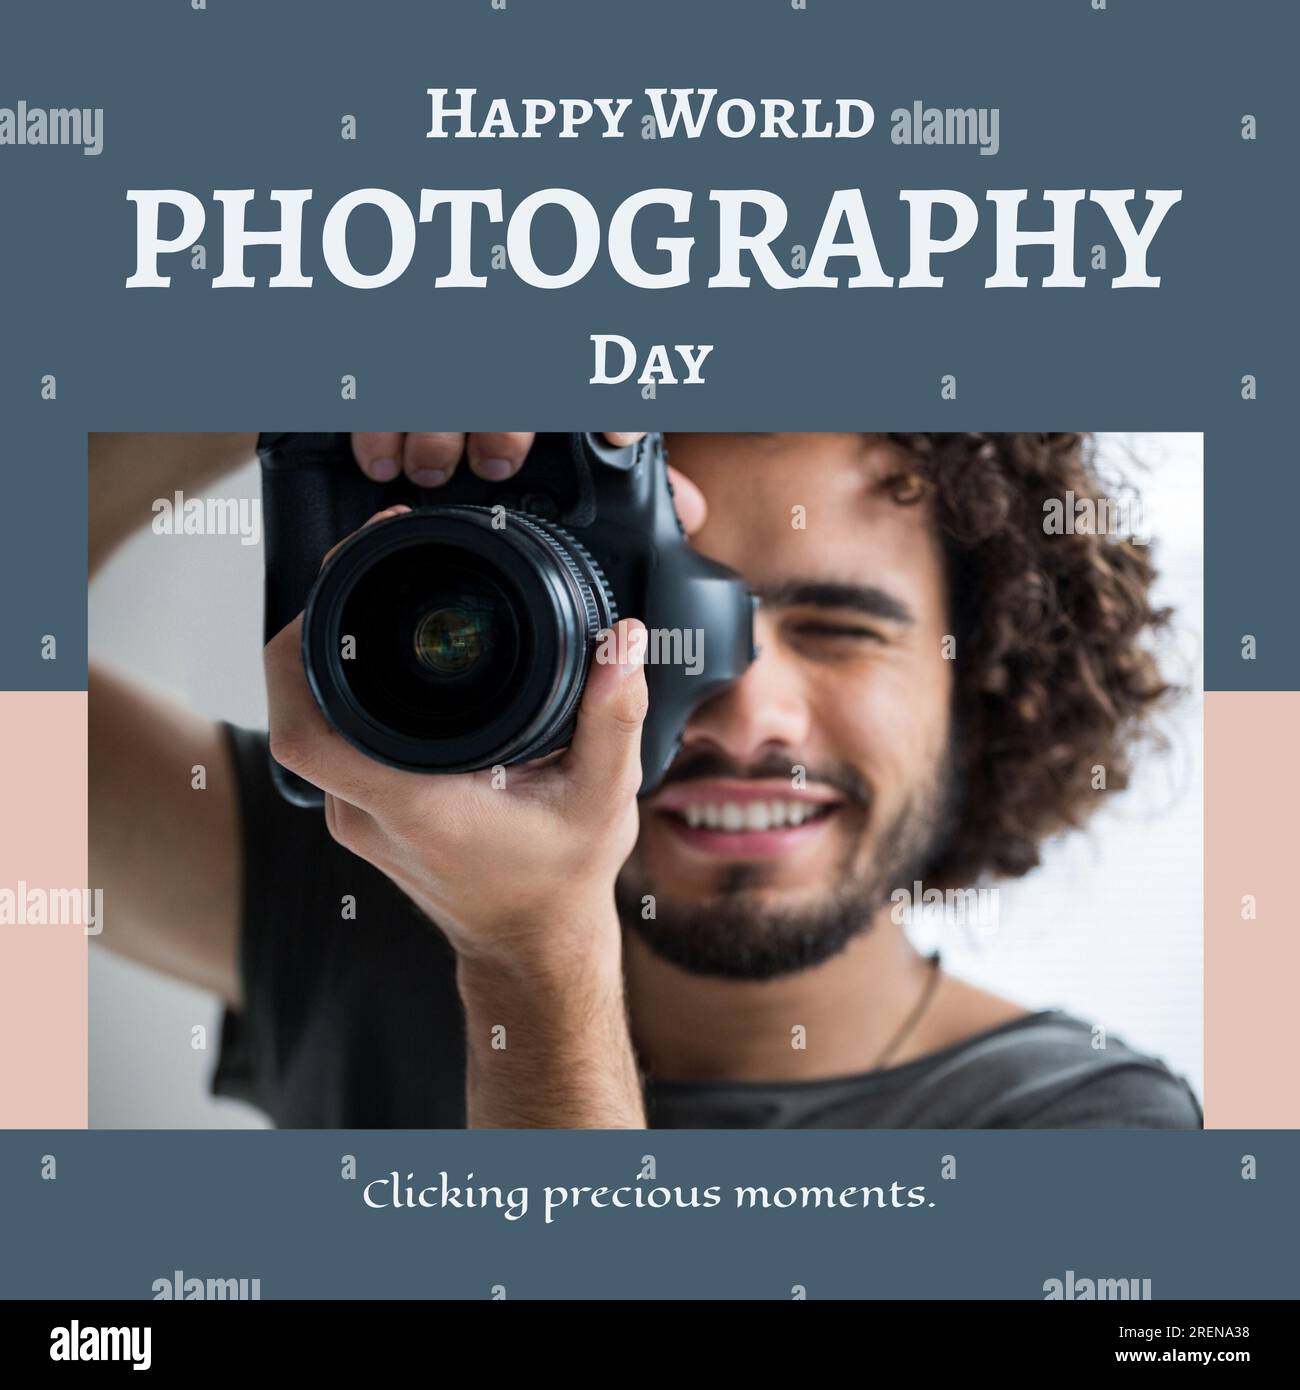 Happy world photography day text in white on blue with smiling caucasian man using slr camera Stock Photo